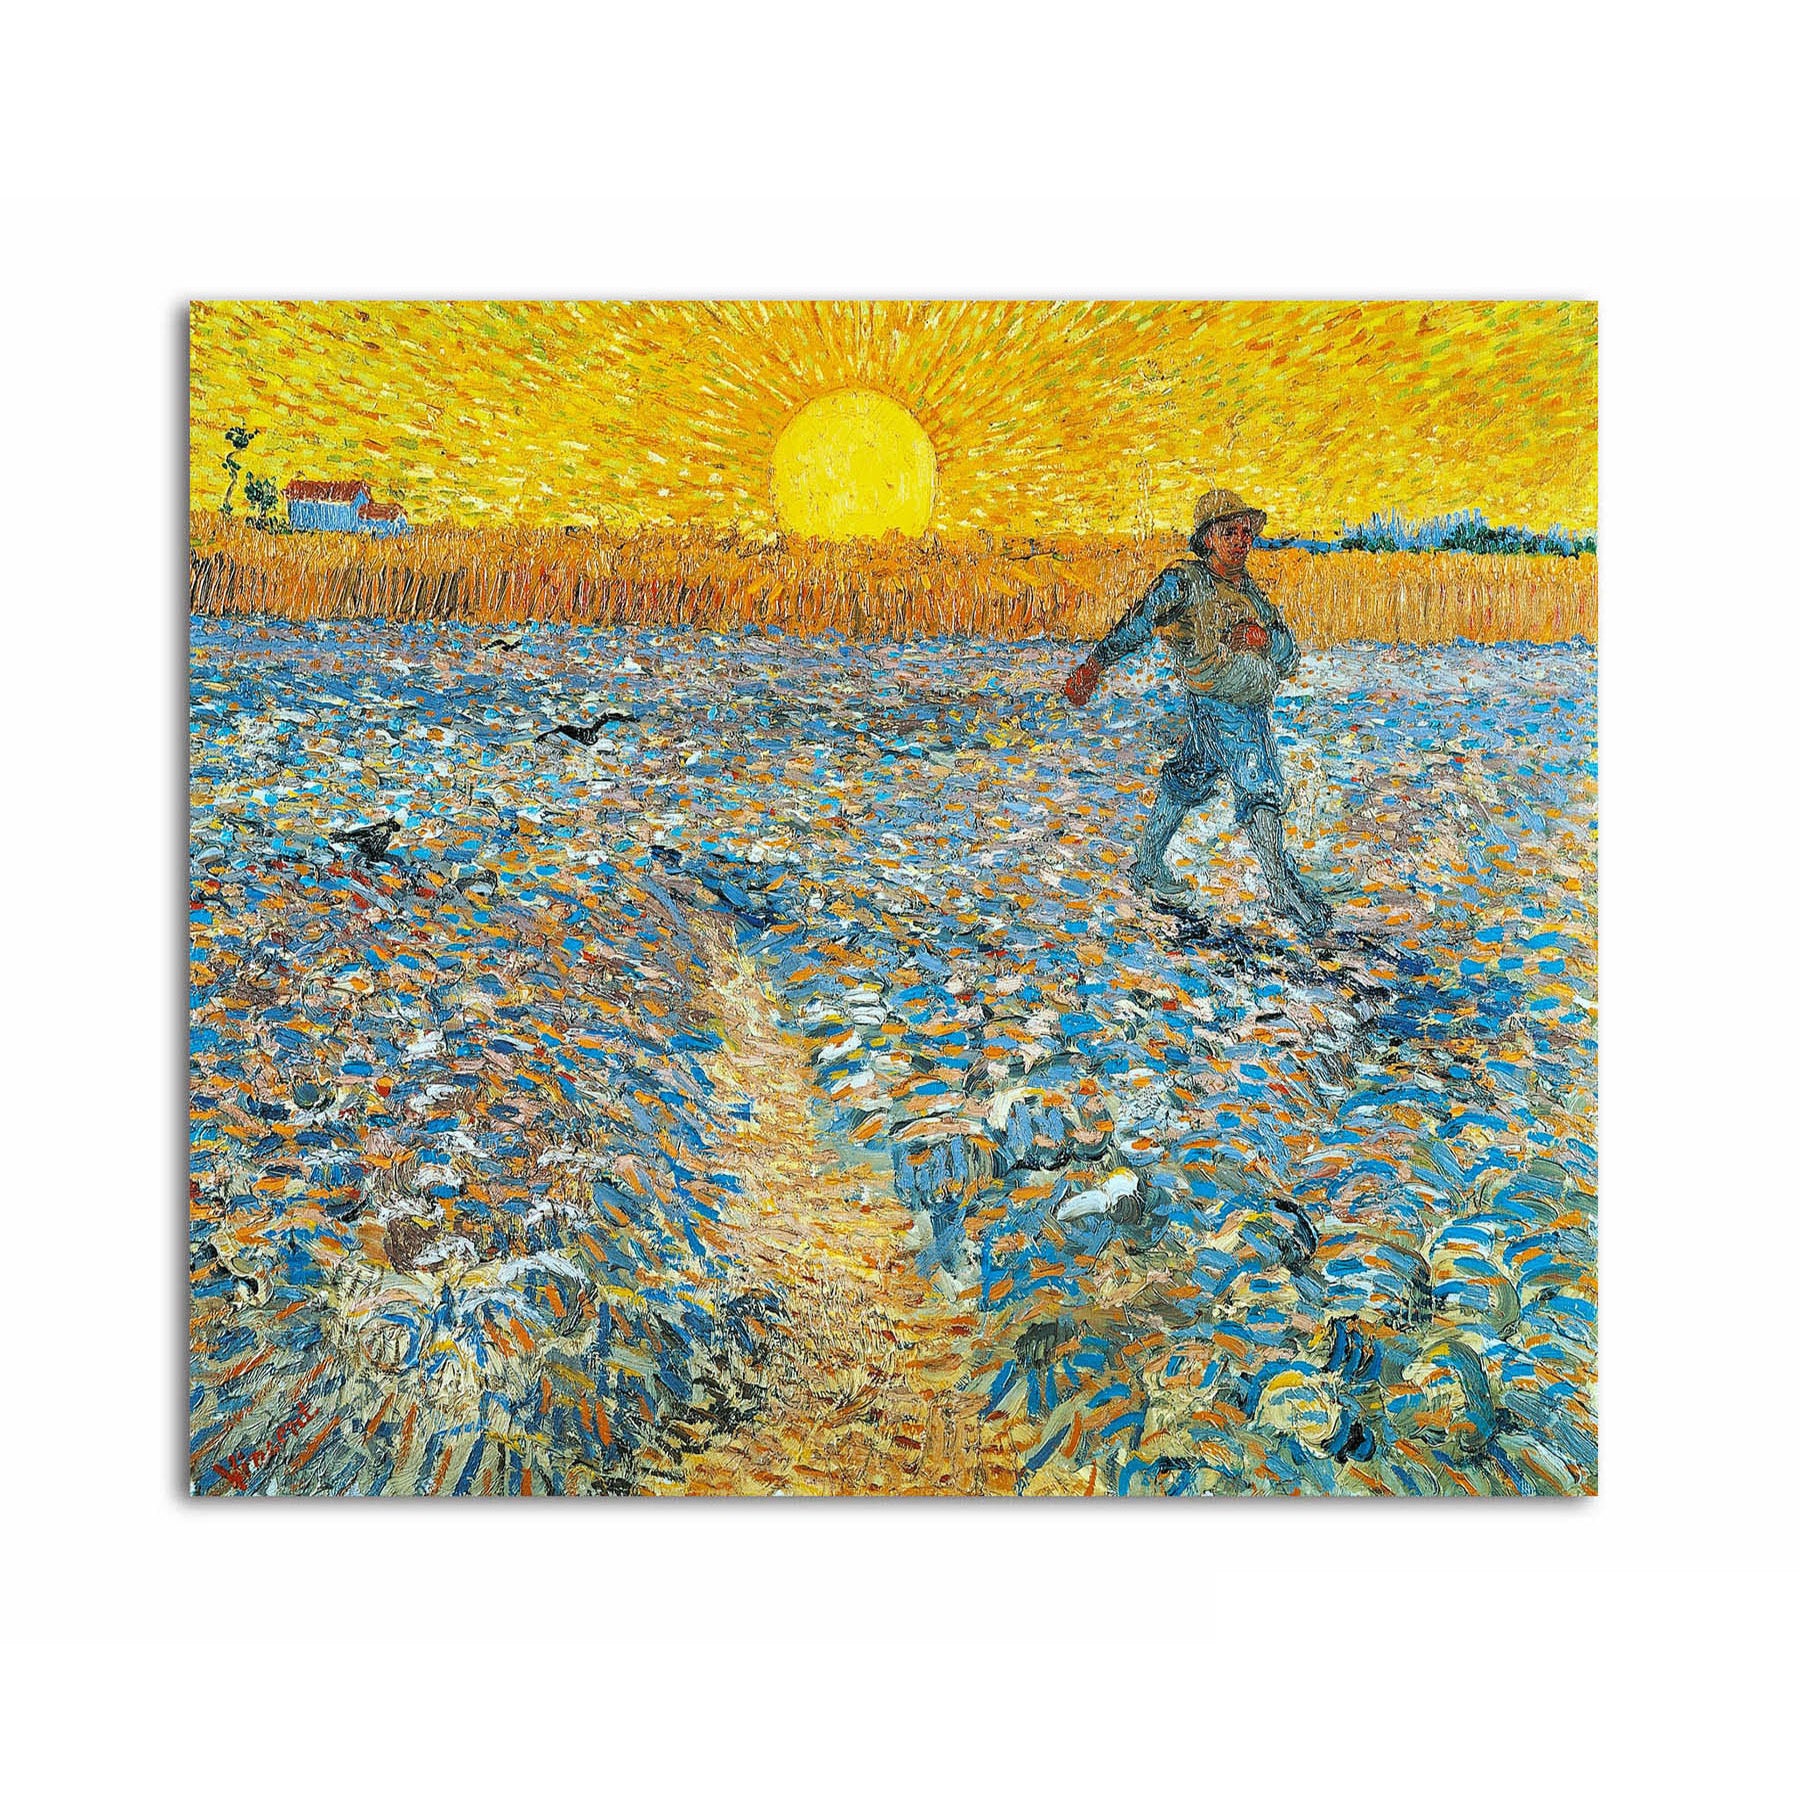 The Sower under the Sun